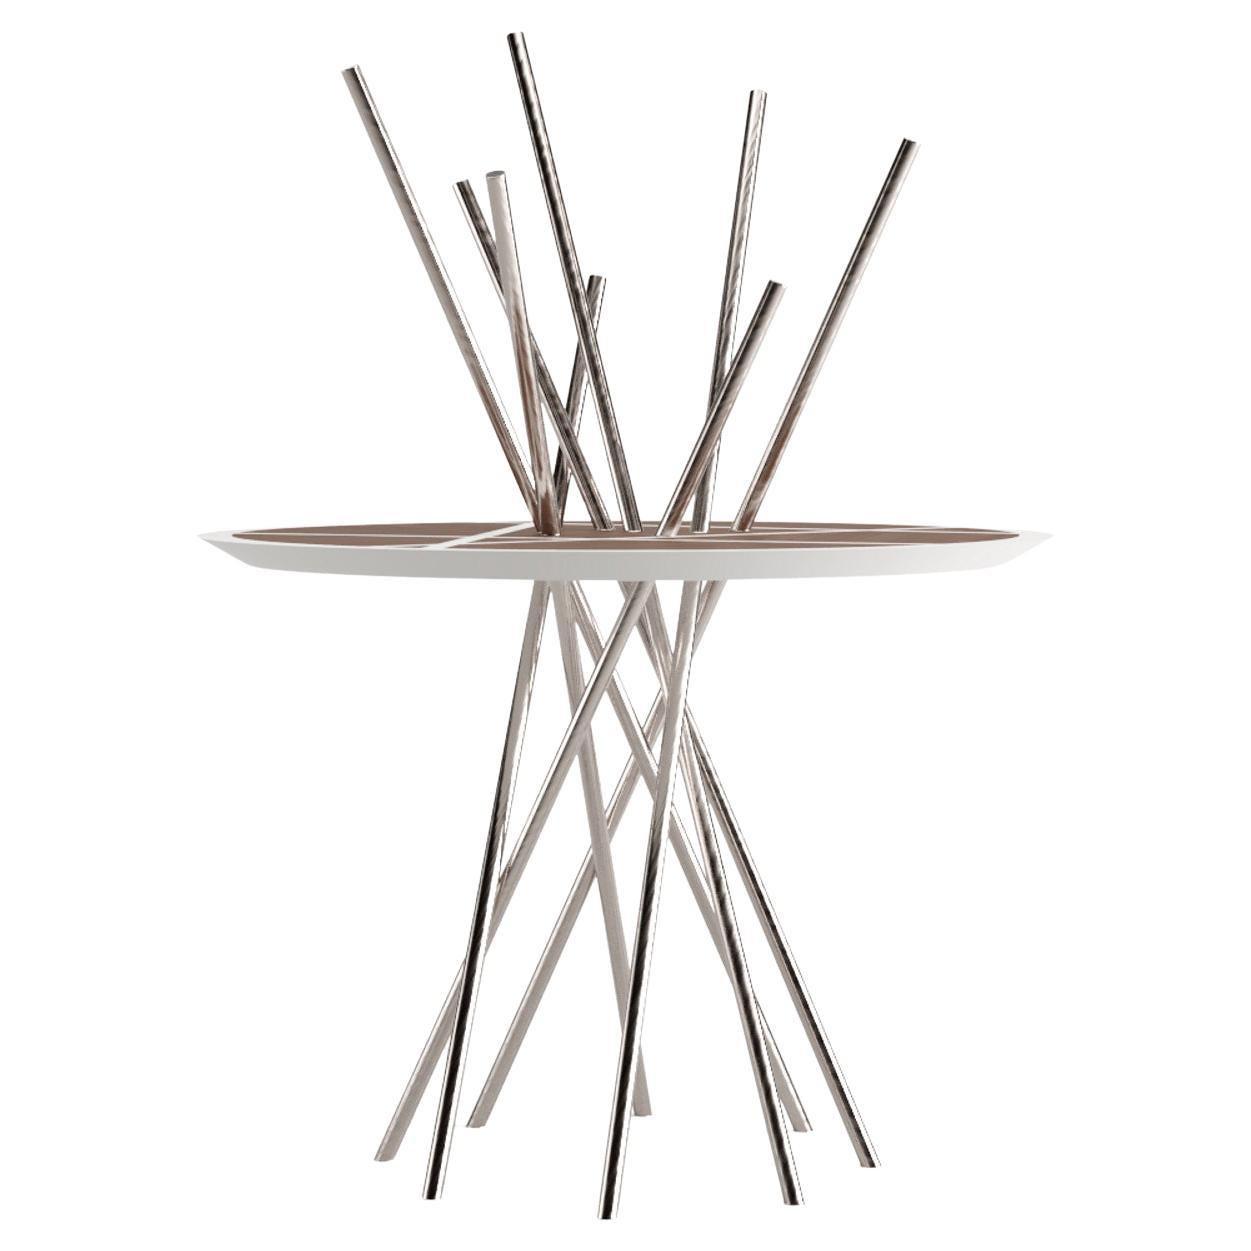 Portugais The Modernity Round Pedestal Table Walnut Wood White Lacquer Brushed Stainless Steel (en anglais) en vente